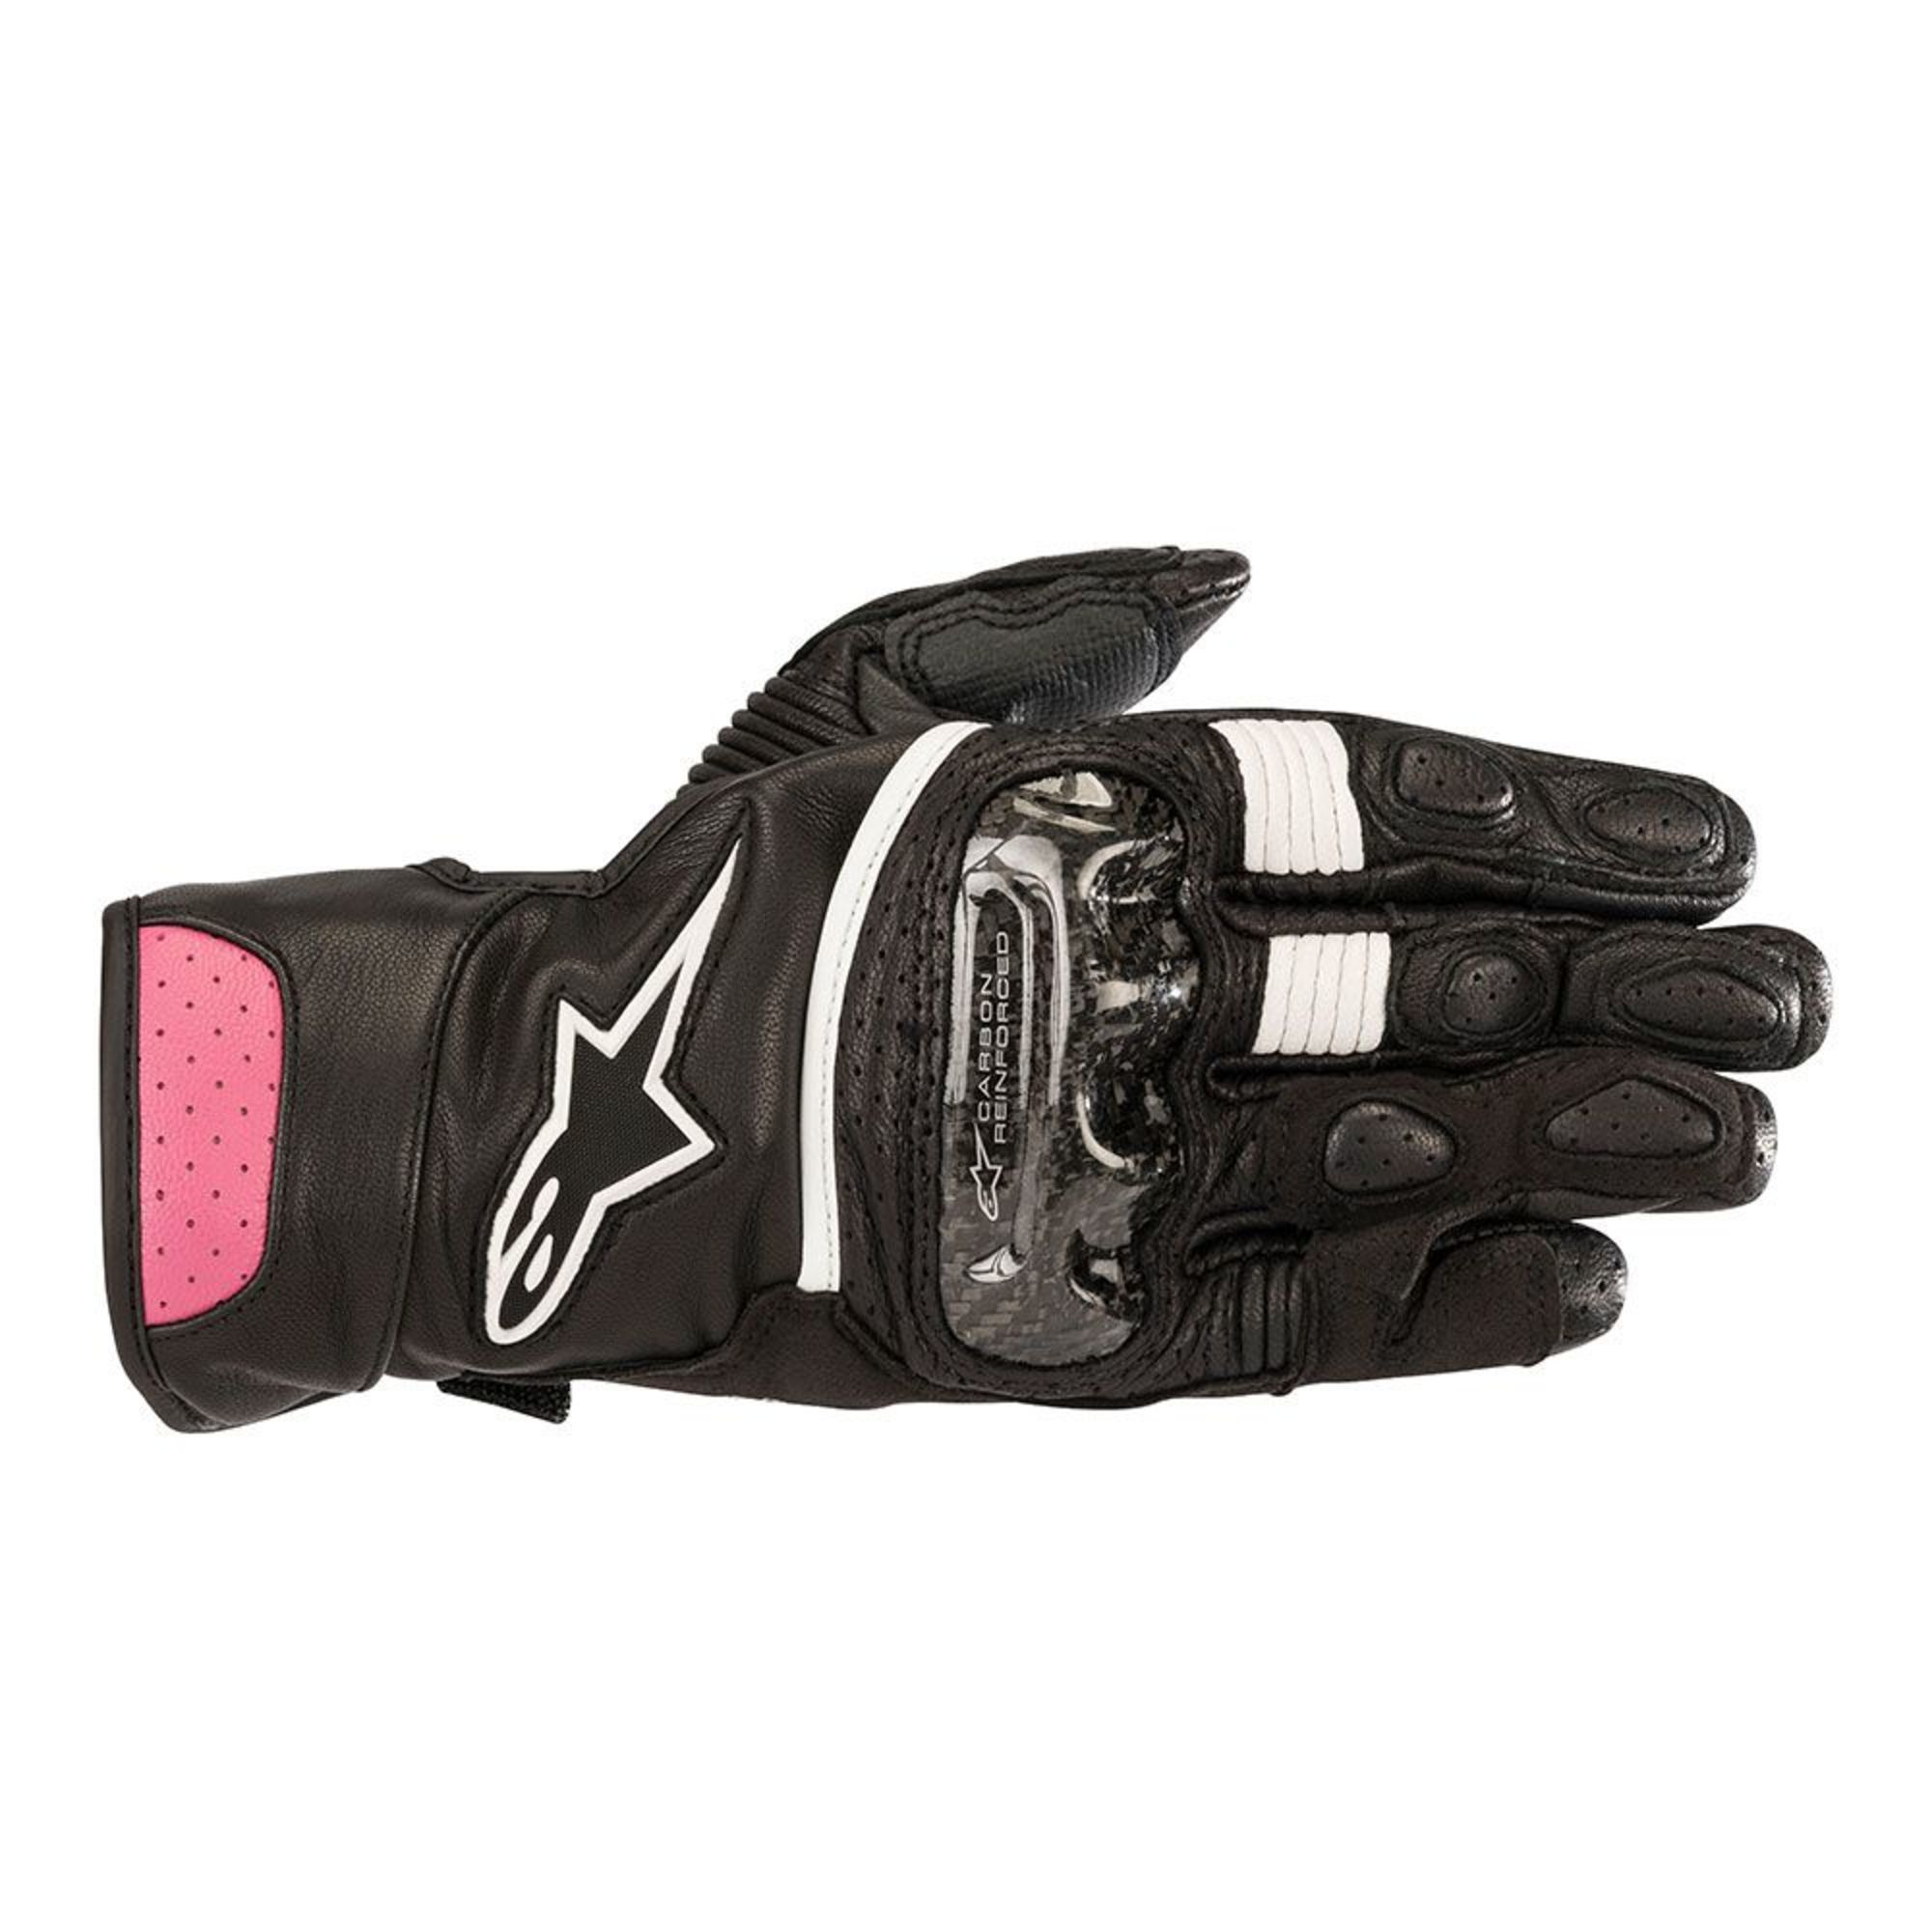 alpinestars leather gloves for womens stella sp2 v2 perforated